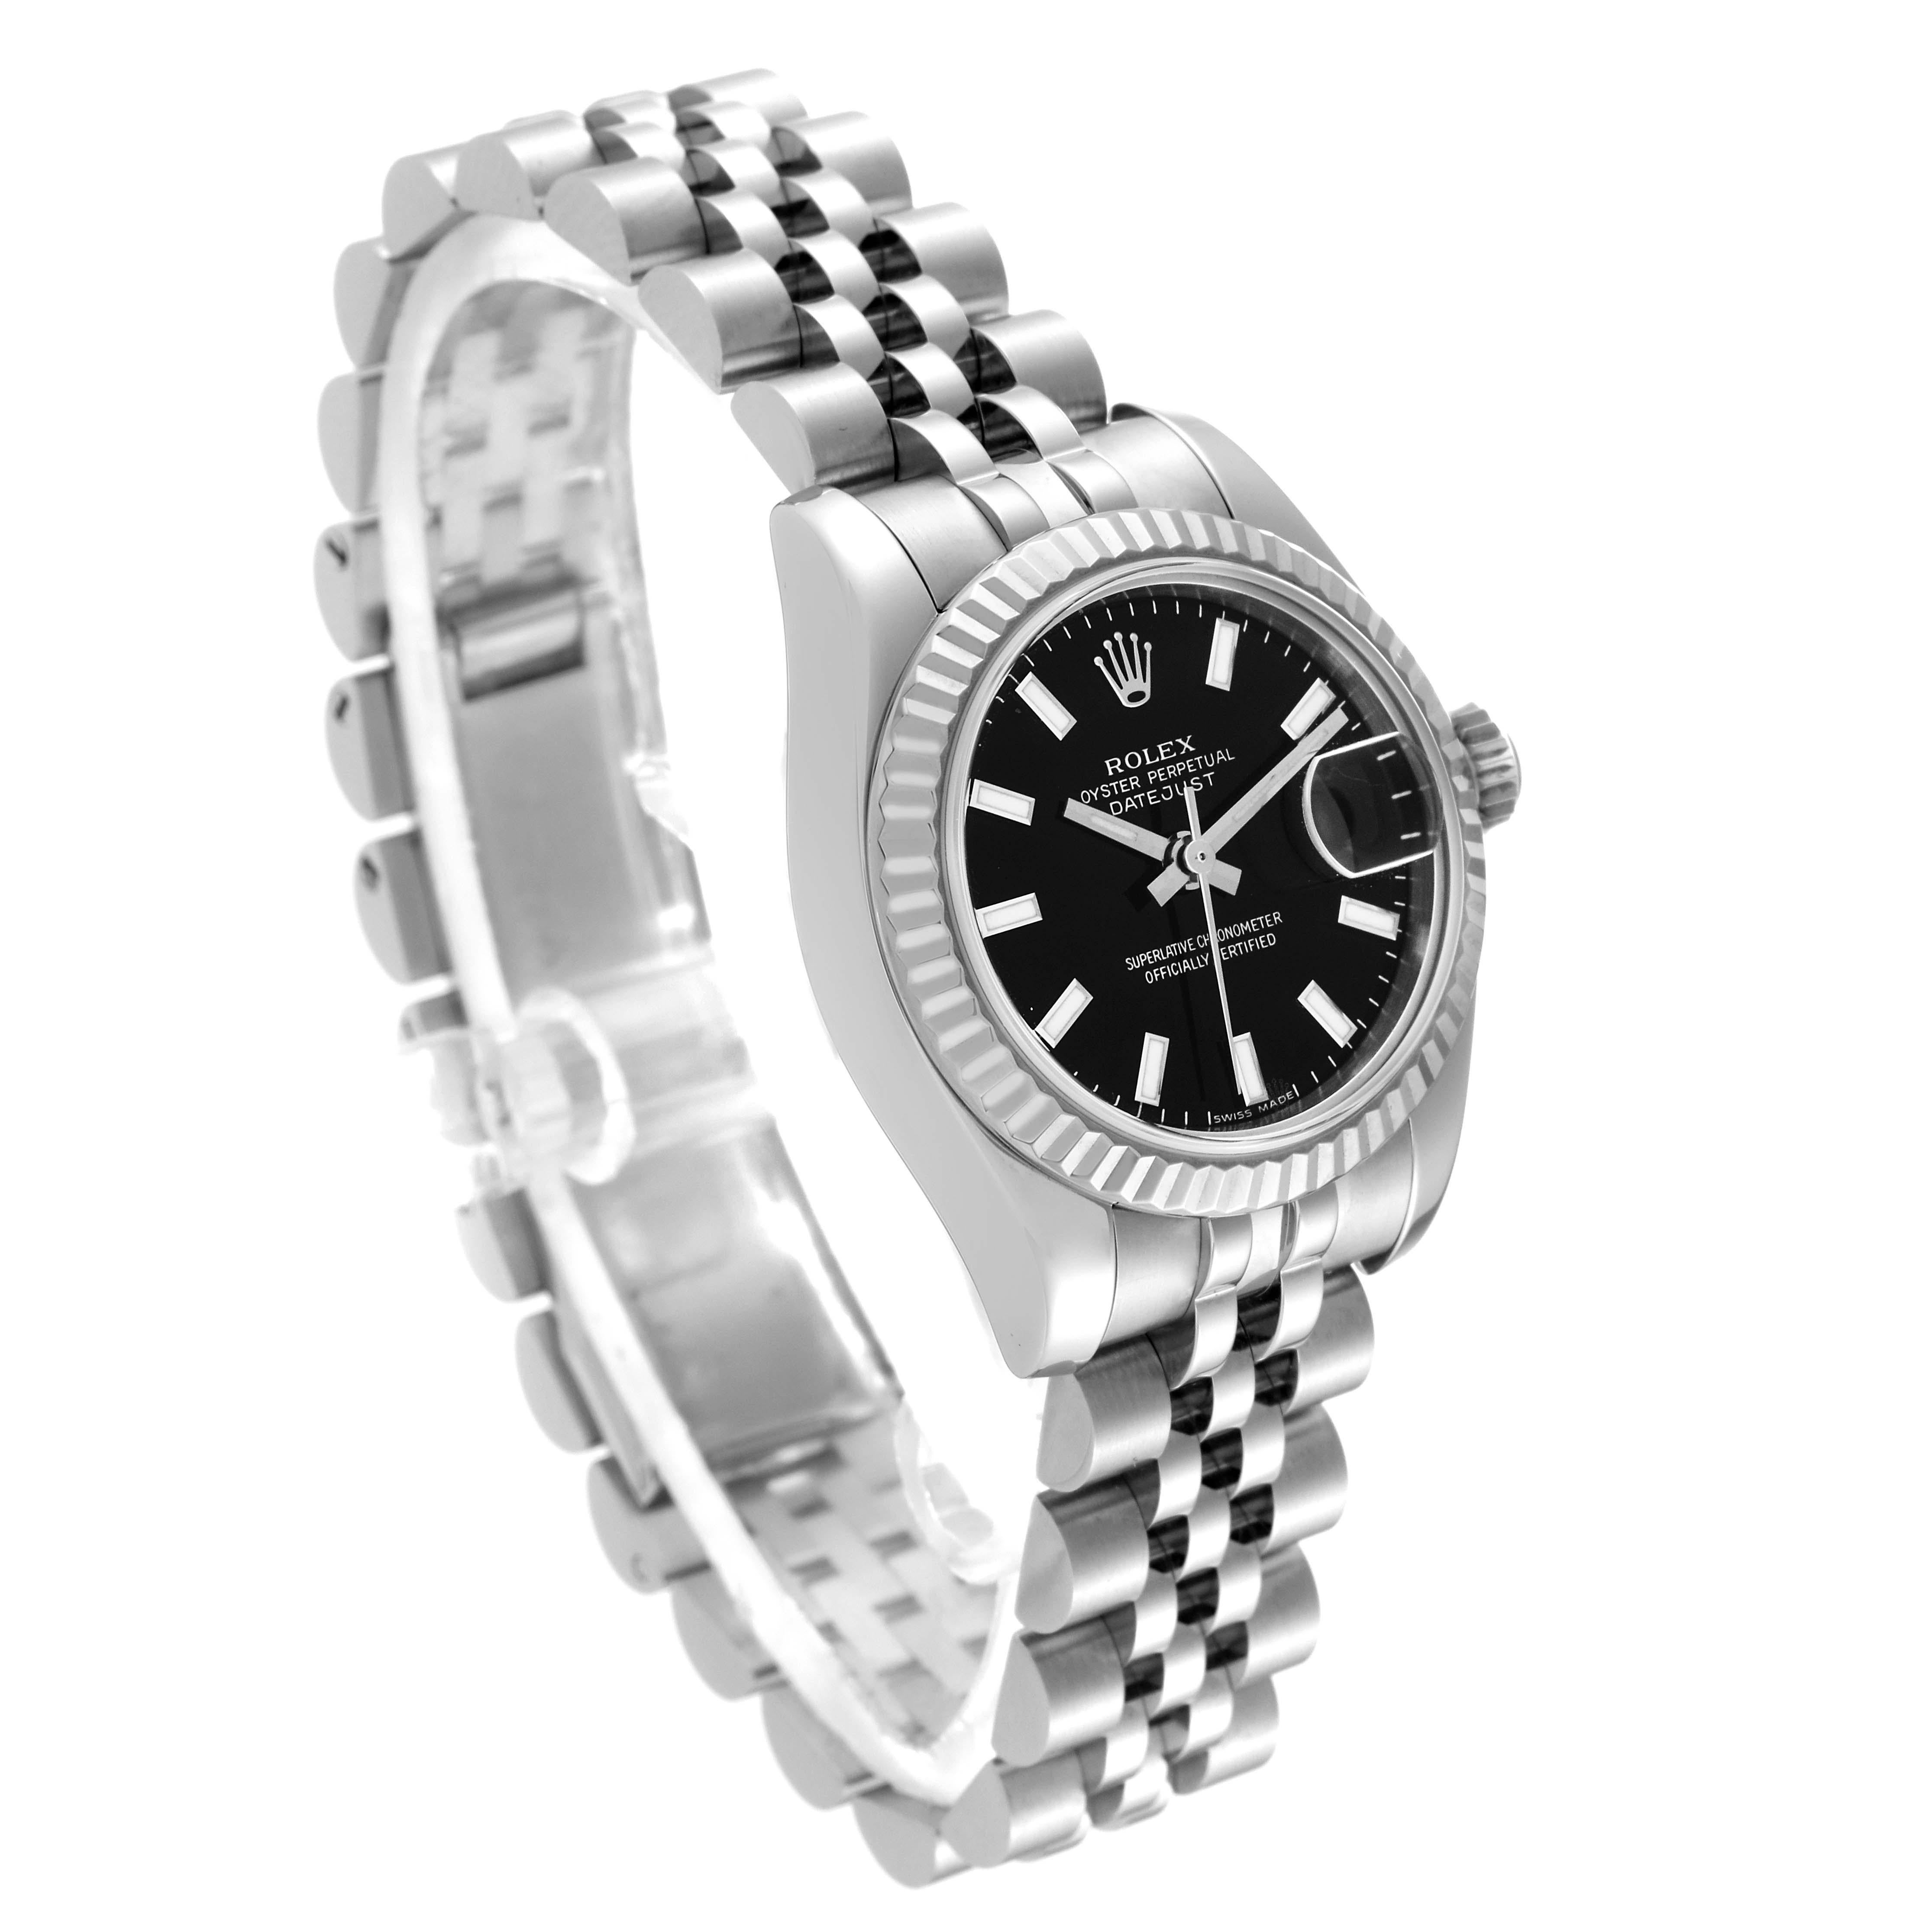 Rolex Datejust Steel White Gold Black Dial Ladies Watch 179174 Box Card For Sale 7